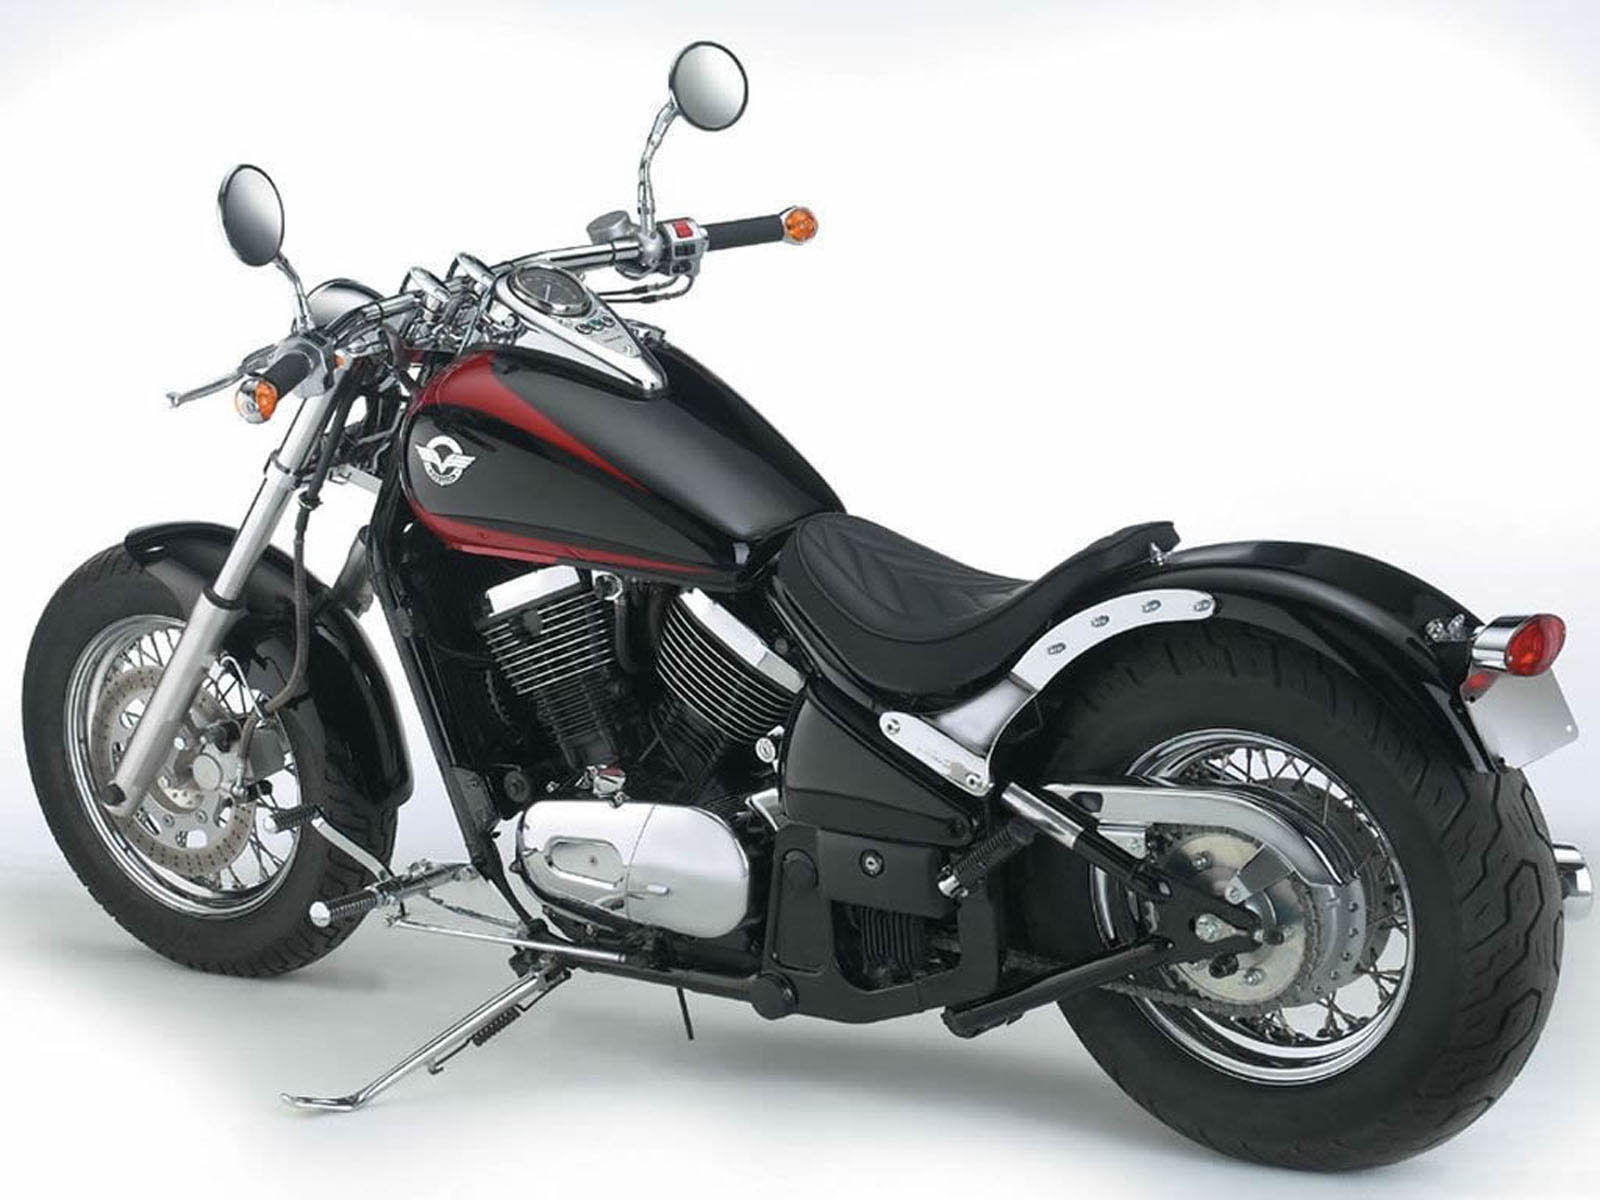 Have Read This Article Harley Davidson Bikes Image